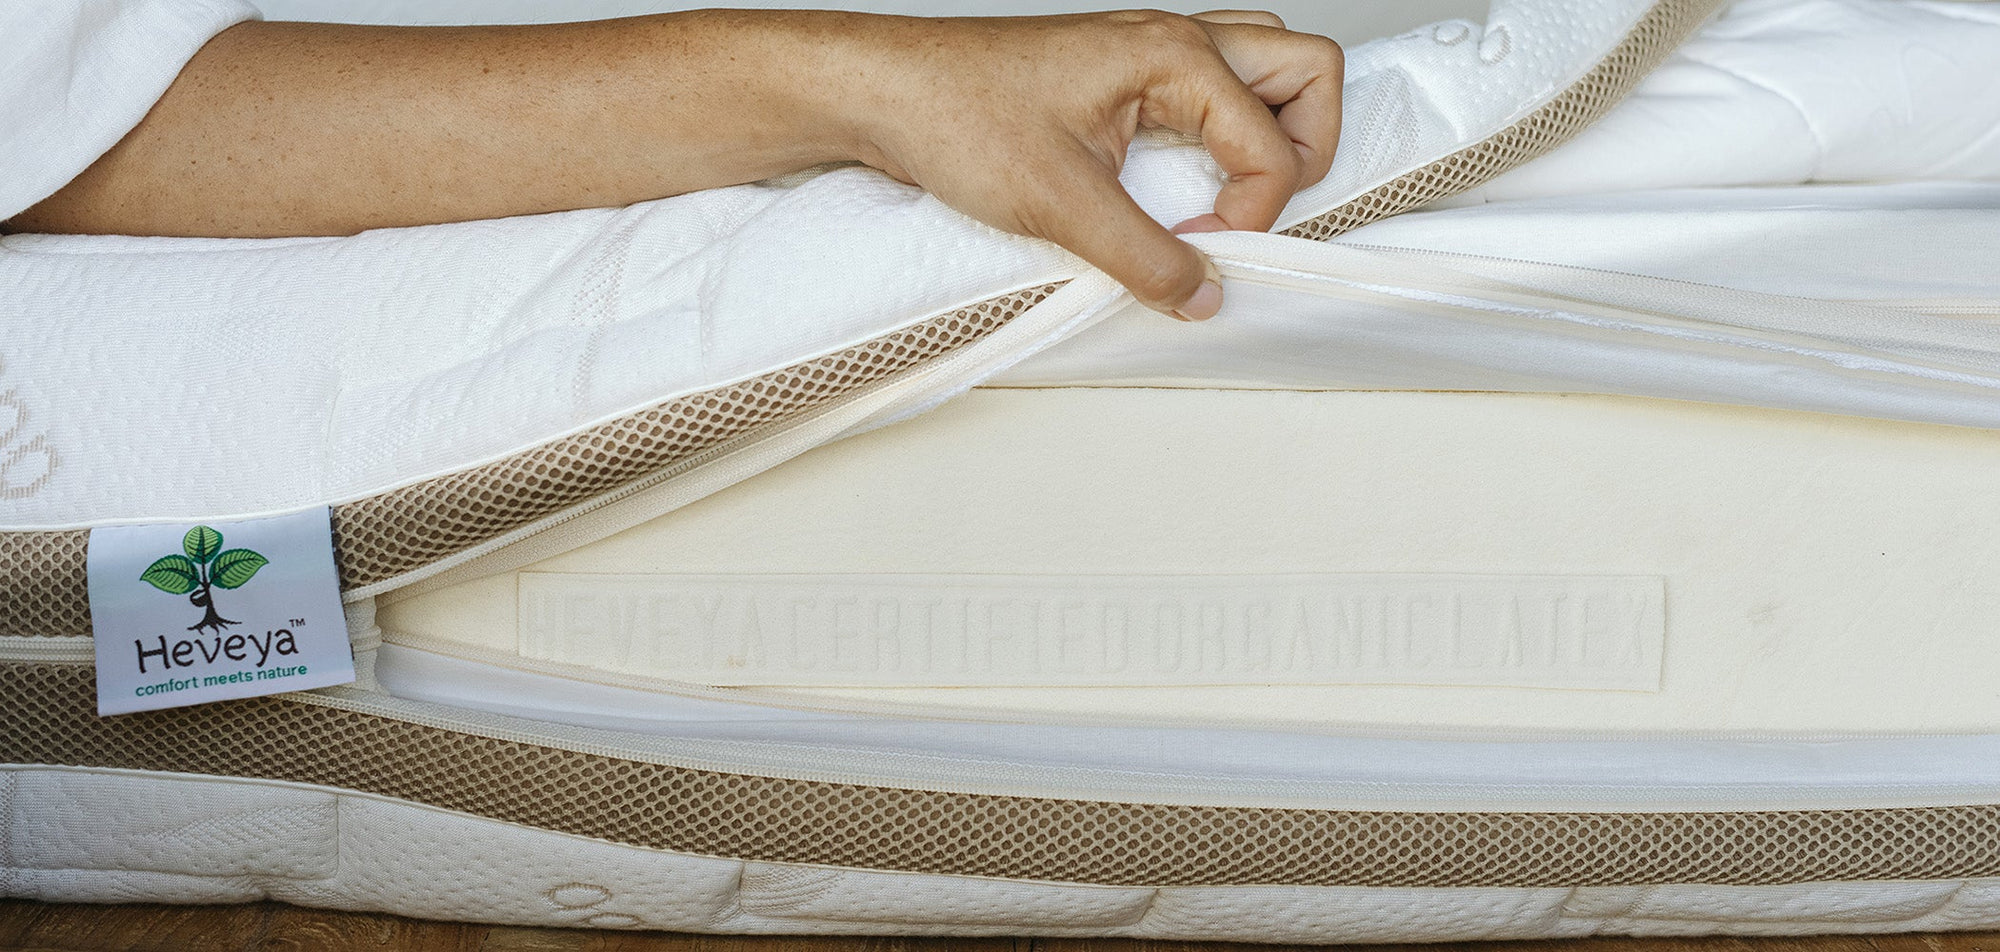 Is Having A Removable & Cleanable Mattress Cover Important